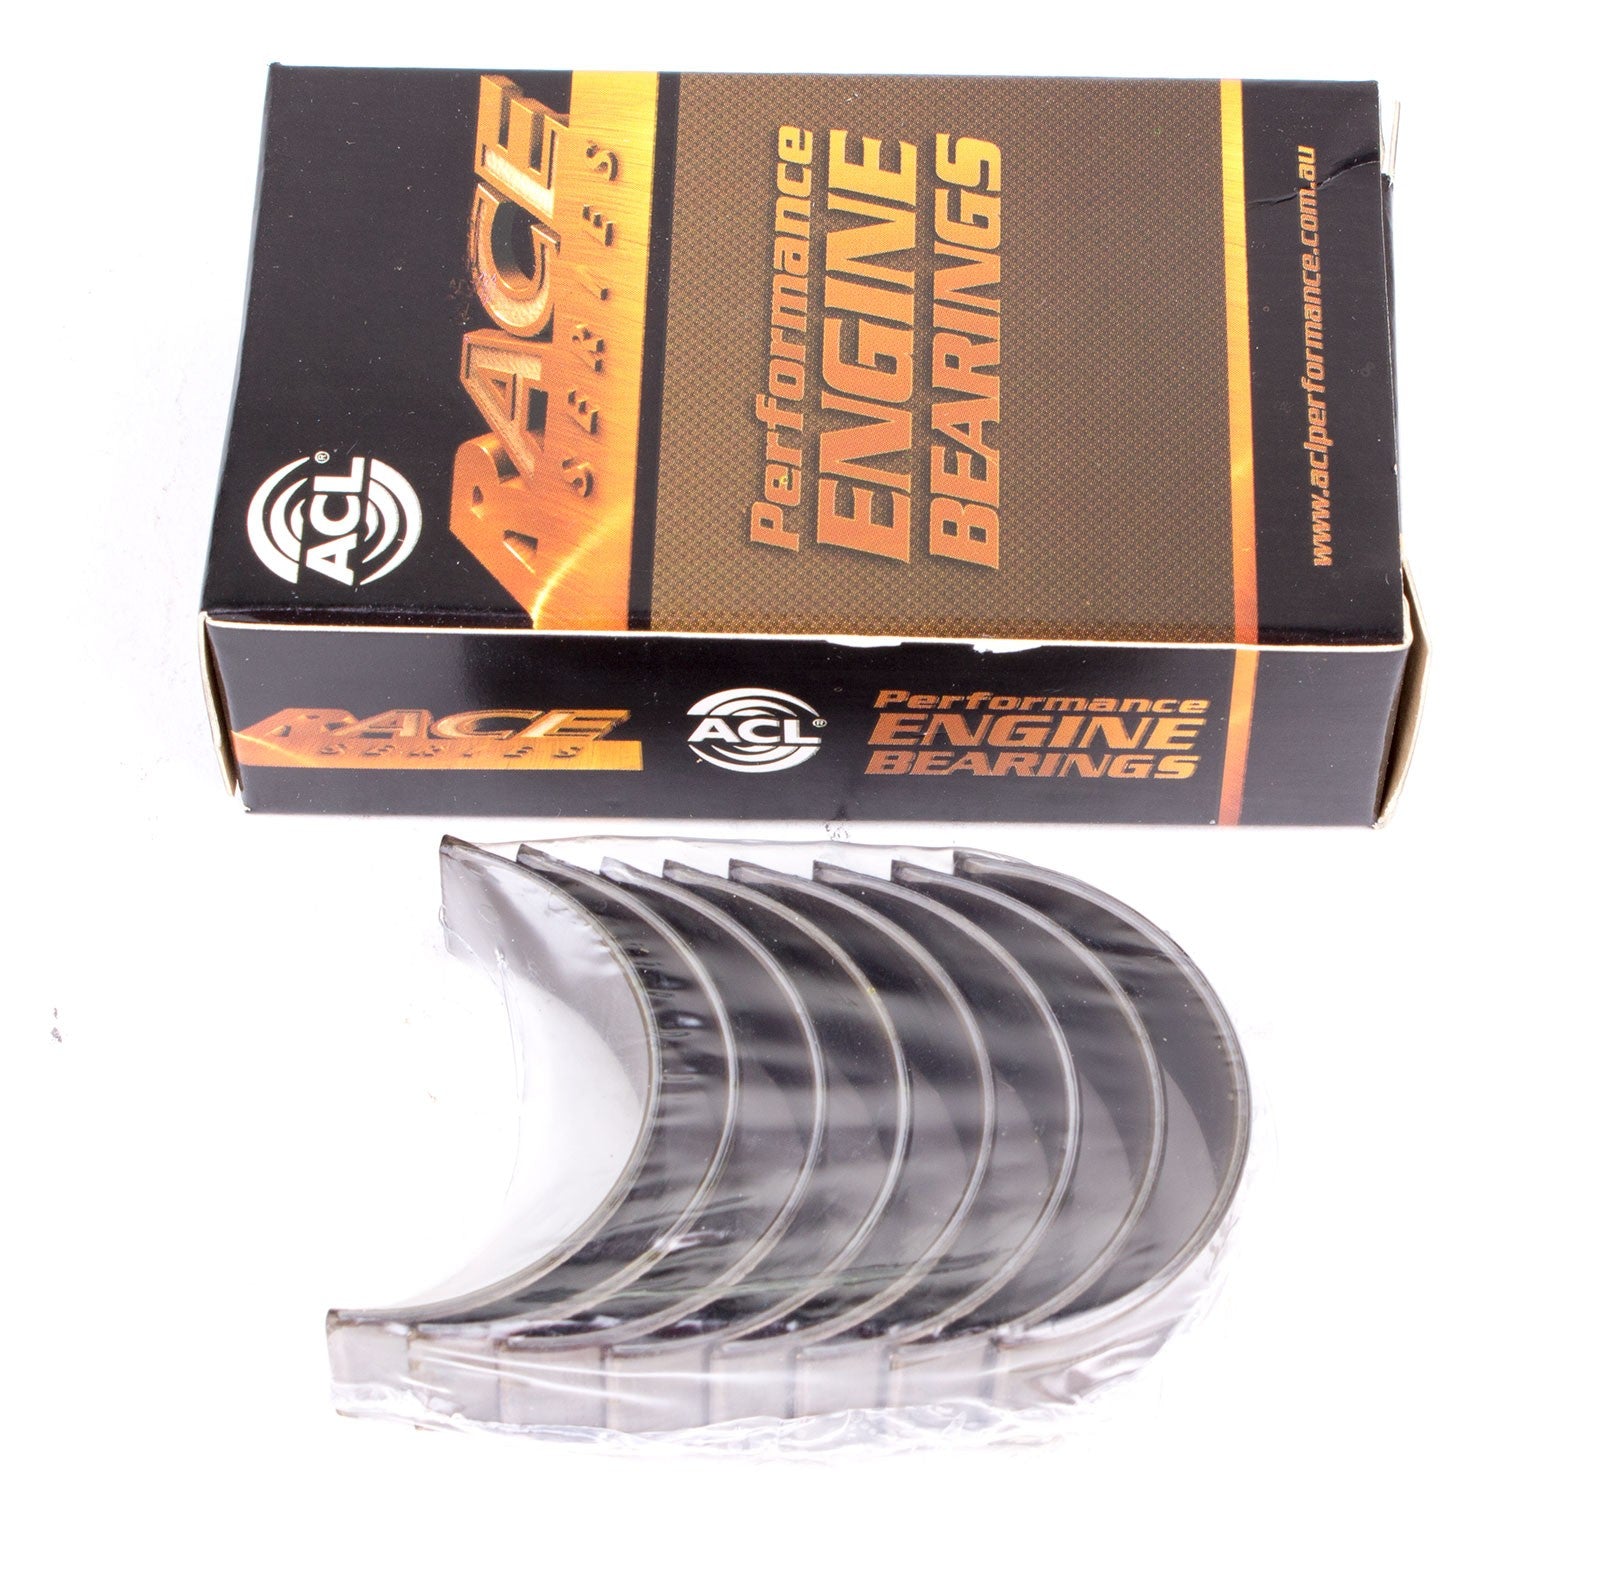 ACL 4B1906H-.50 Con rod bearing set (ACL Race Series) Photo-0 